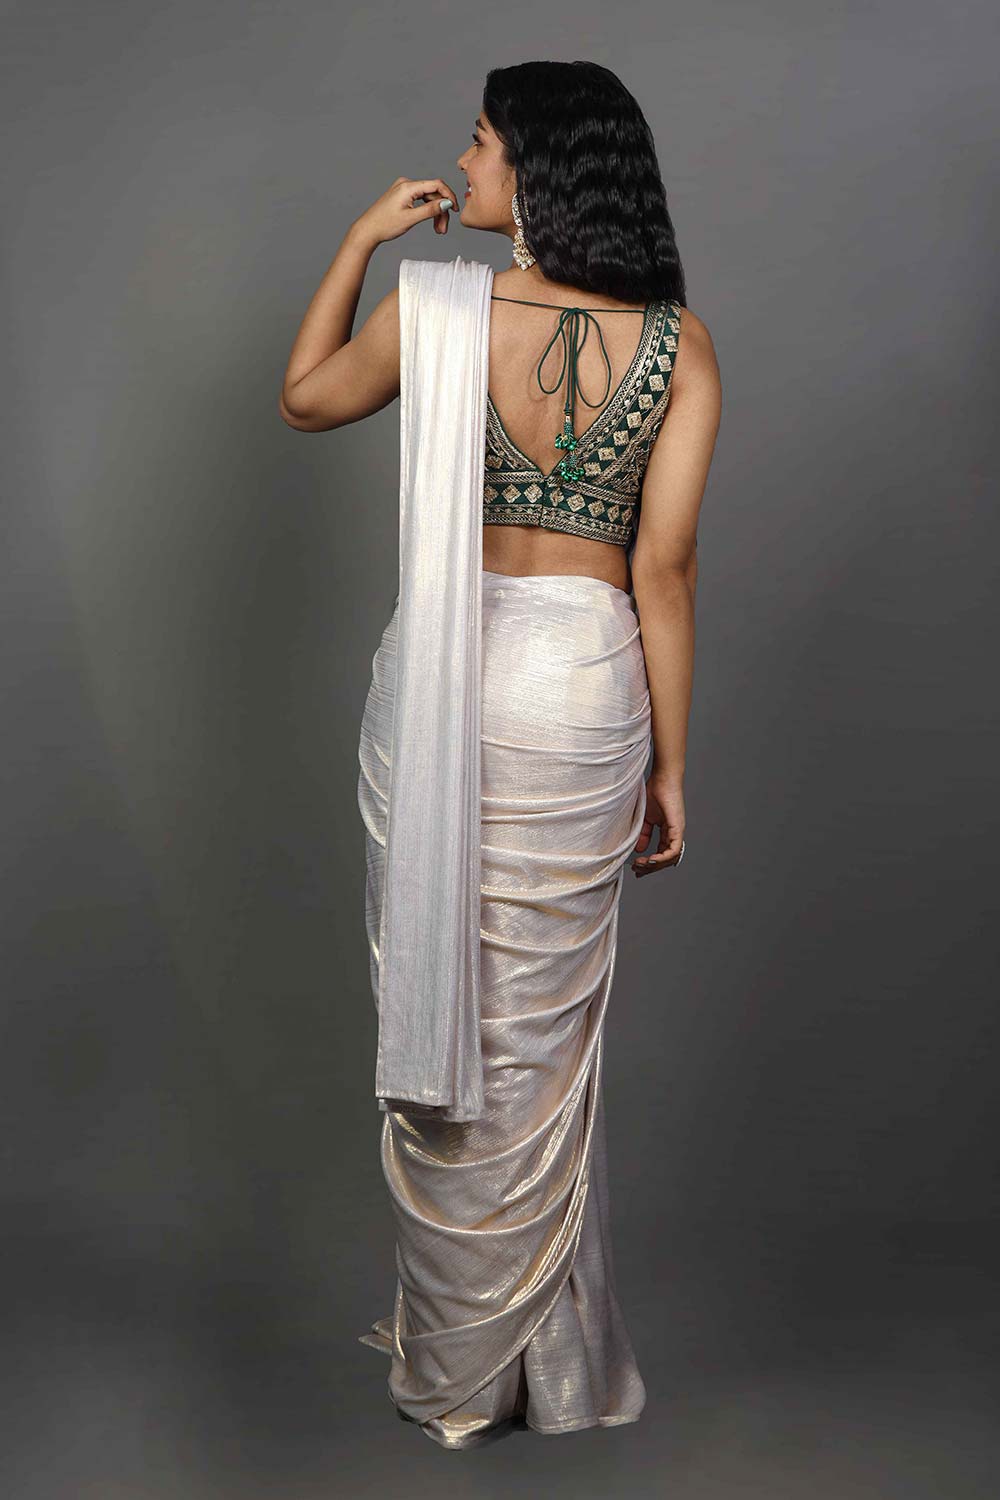 Shop Athena Metallic Gold & White One Minute Saree at best offer at our  Store - One Minute Saree